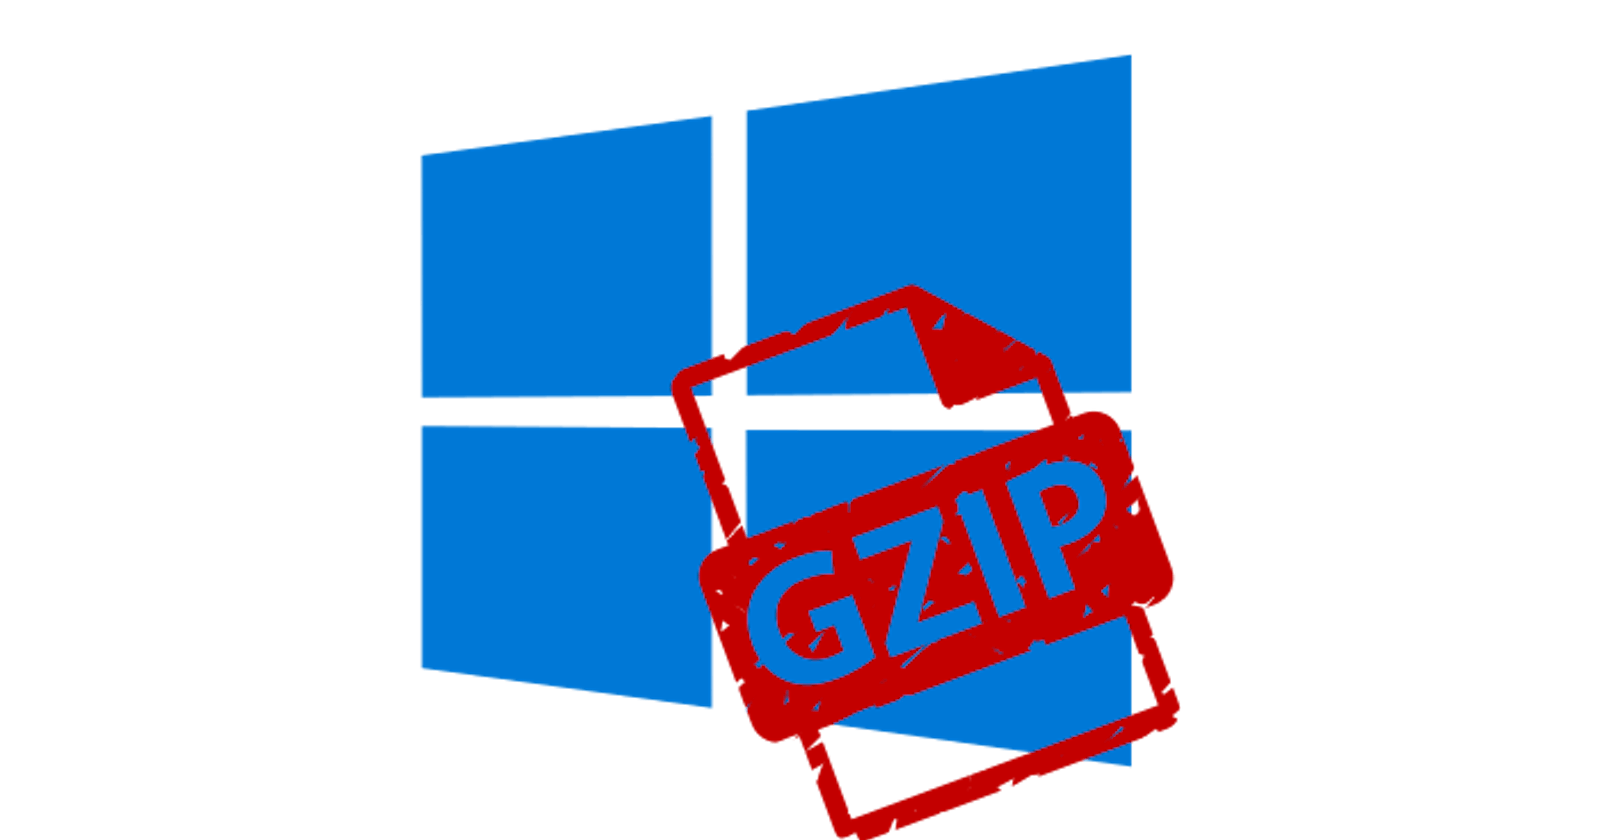 No 7zip Allowed: Extracting Oracle's Gzipped Java Tarball On Windows to Create an Isolated, Zero Footprint Java Install for CIS CAT Pro